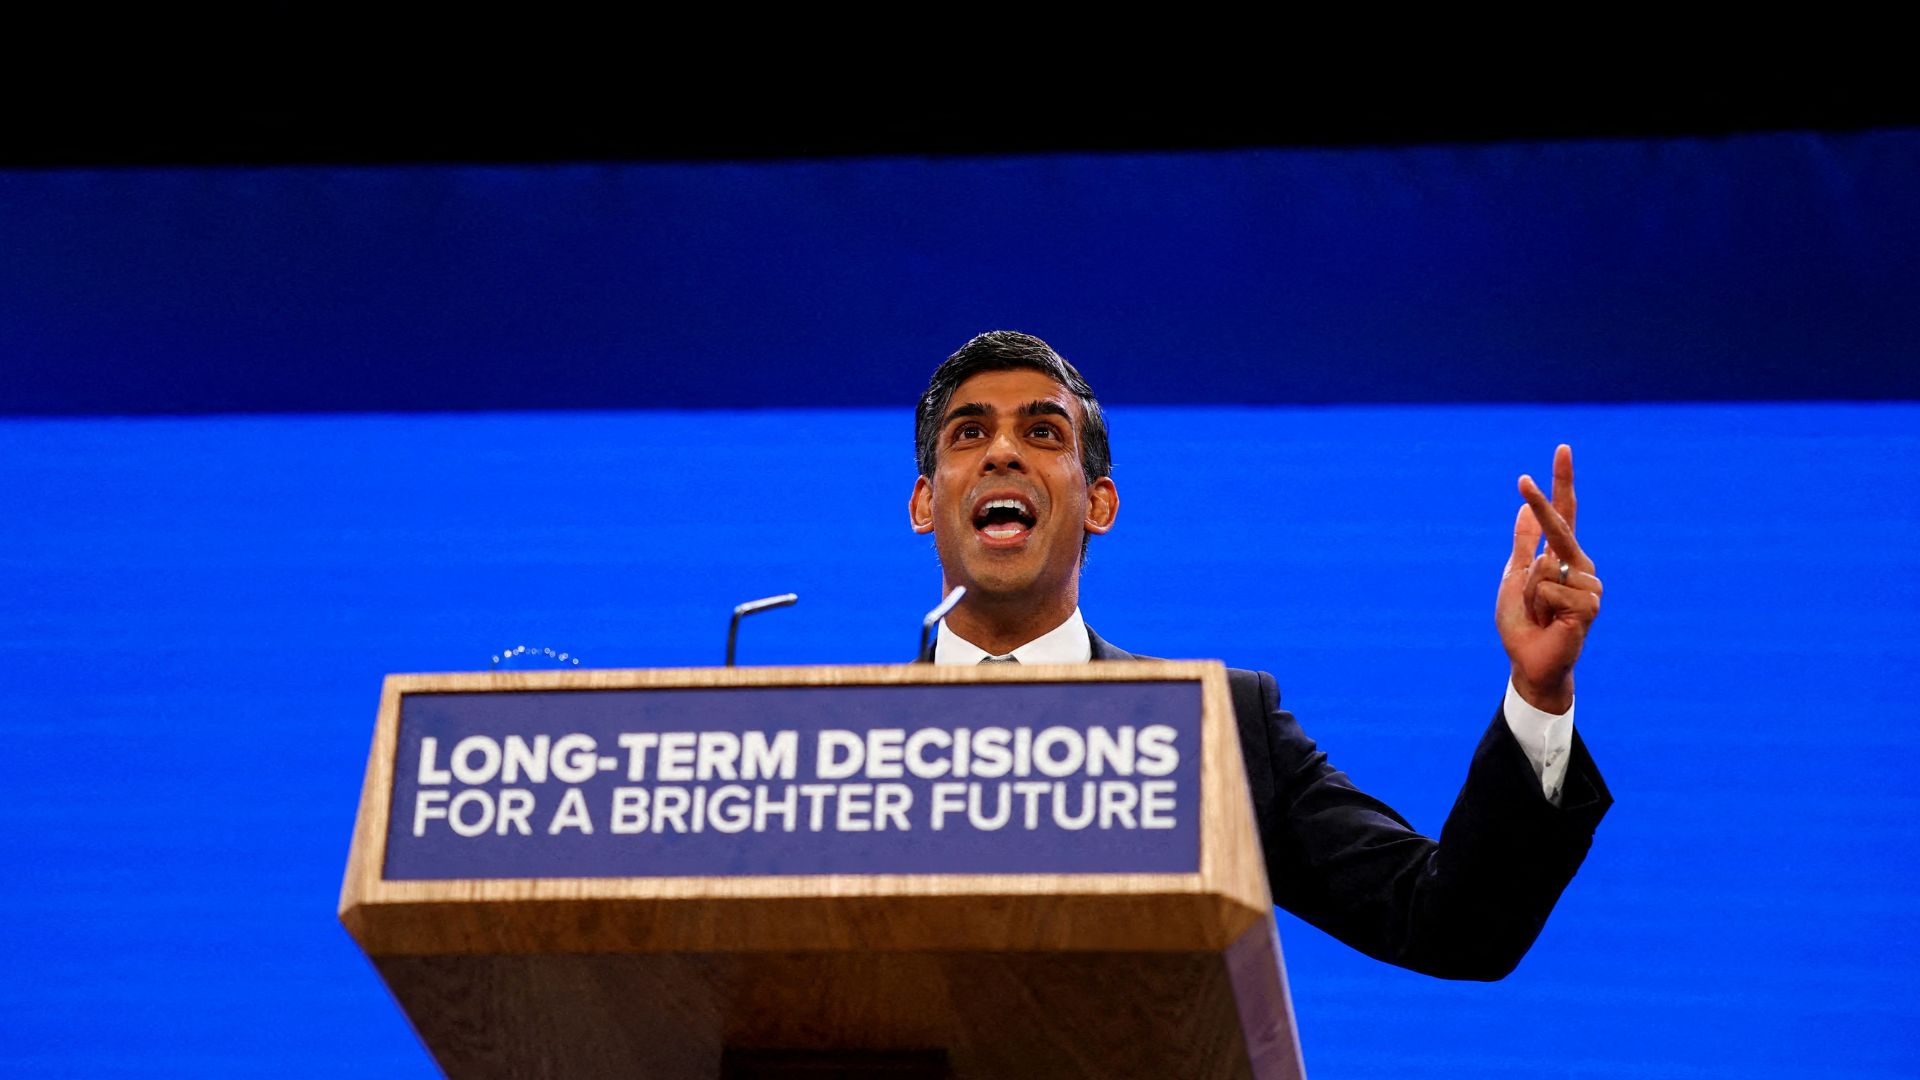 UK Prime Minister Rishi Sunak delivered the death knell for the northern leg of HS2 at Conservative Party's annual conference in Manchester. /Hannah McKay/Reuters